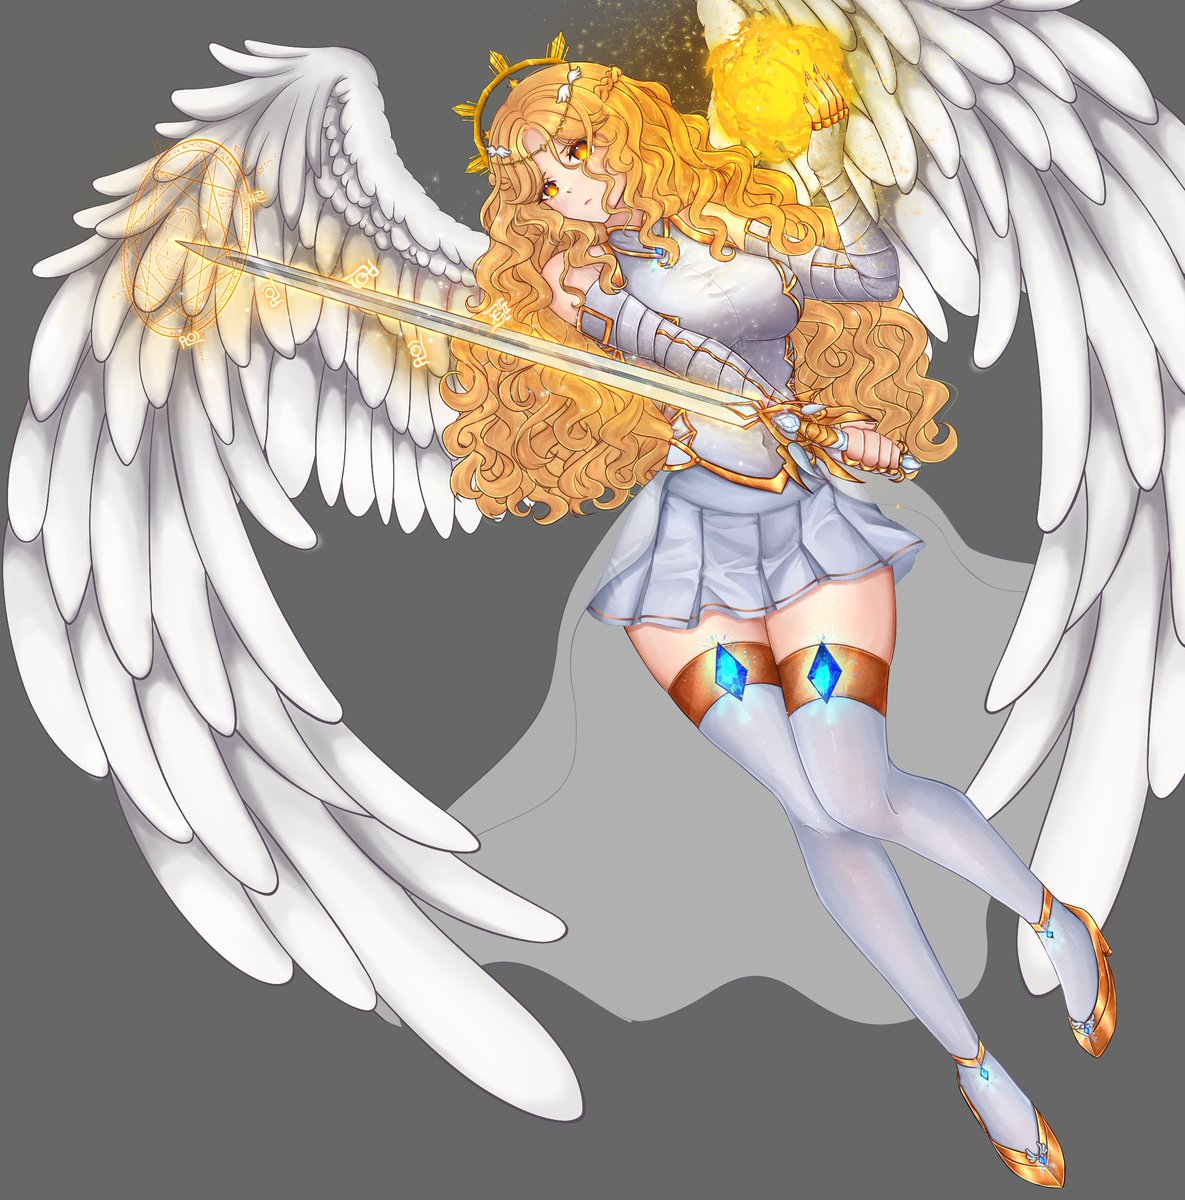 Angel wip✨

#robloxart #roblox #robloxdev #rkgk #wip #angelgirl #angel #commission #commissionsopen #依頼絵 #robloxcommission #cute #art #illustration #ArtistOnTwitter